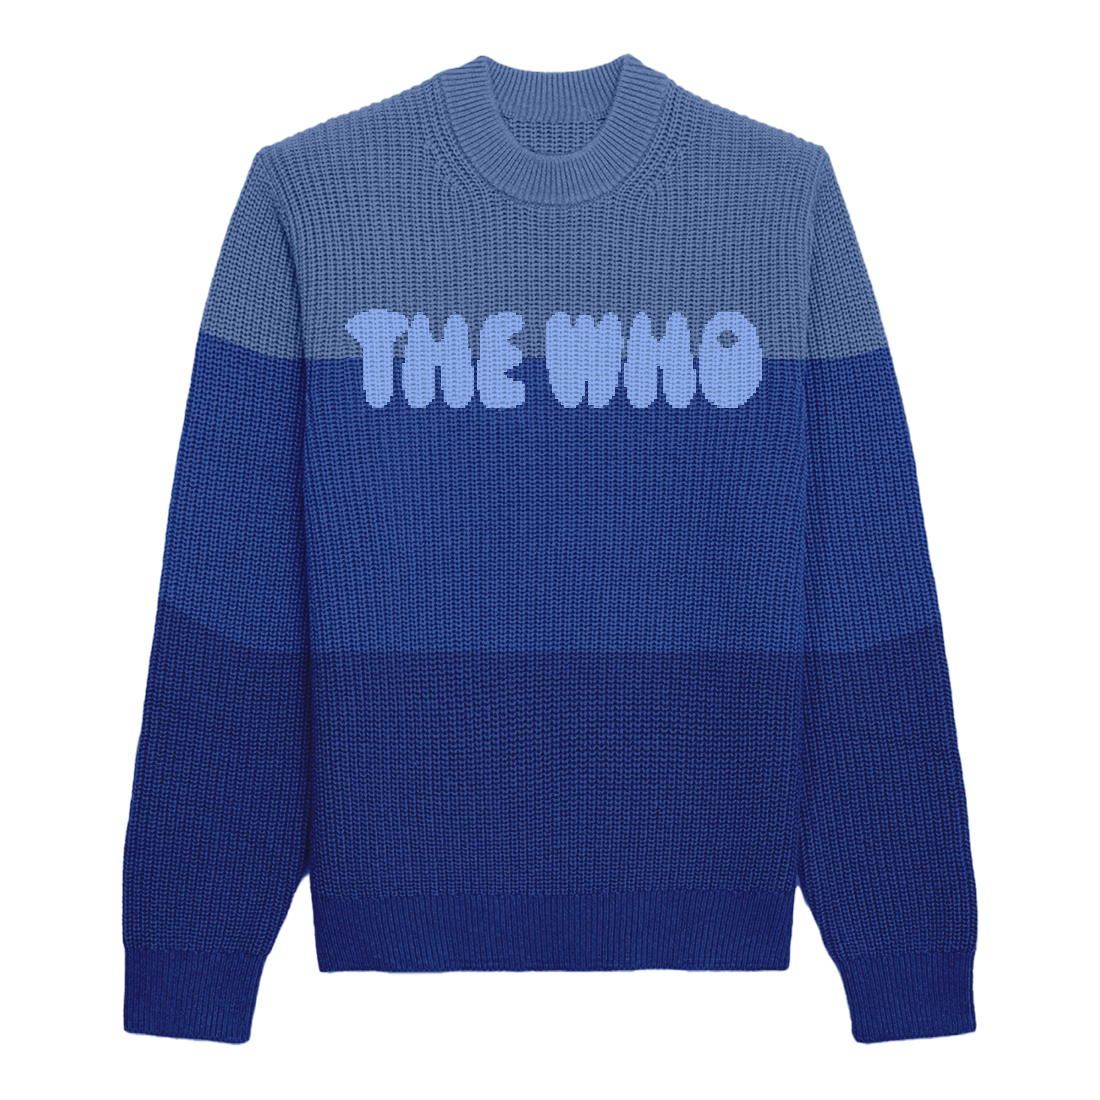 The Who - Colour Block “The Who” Jumper